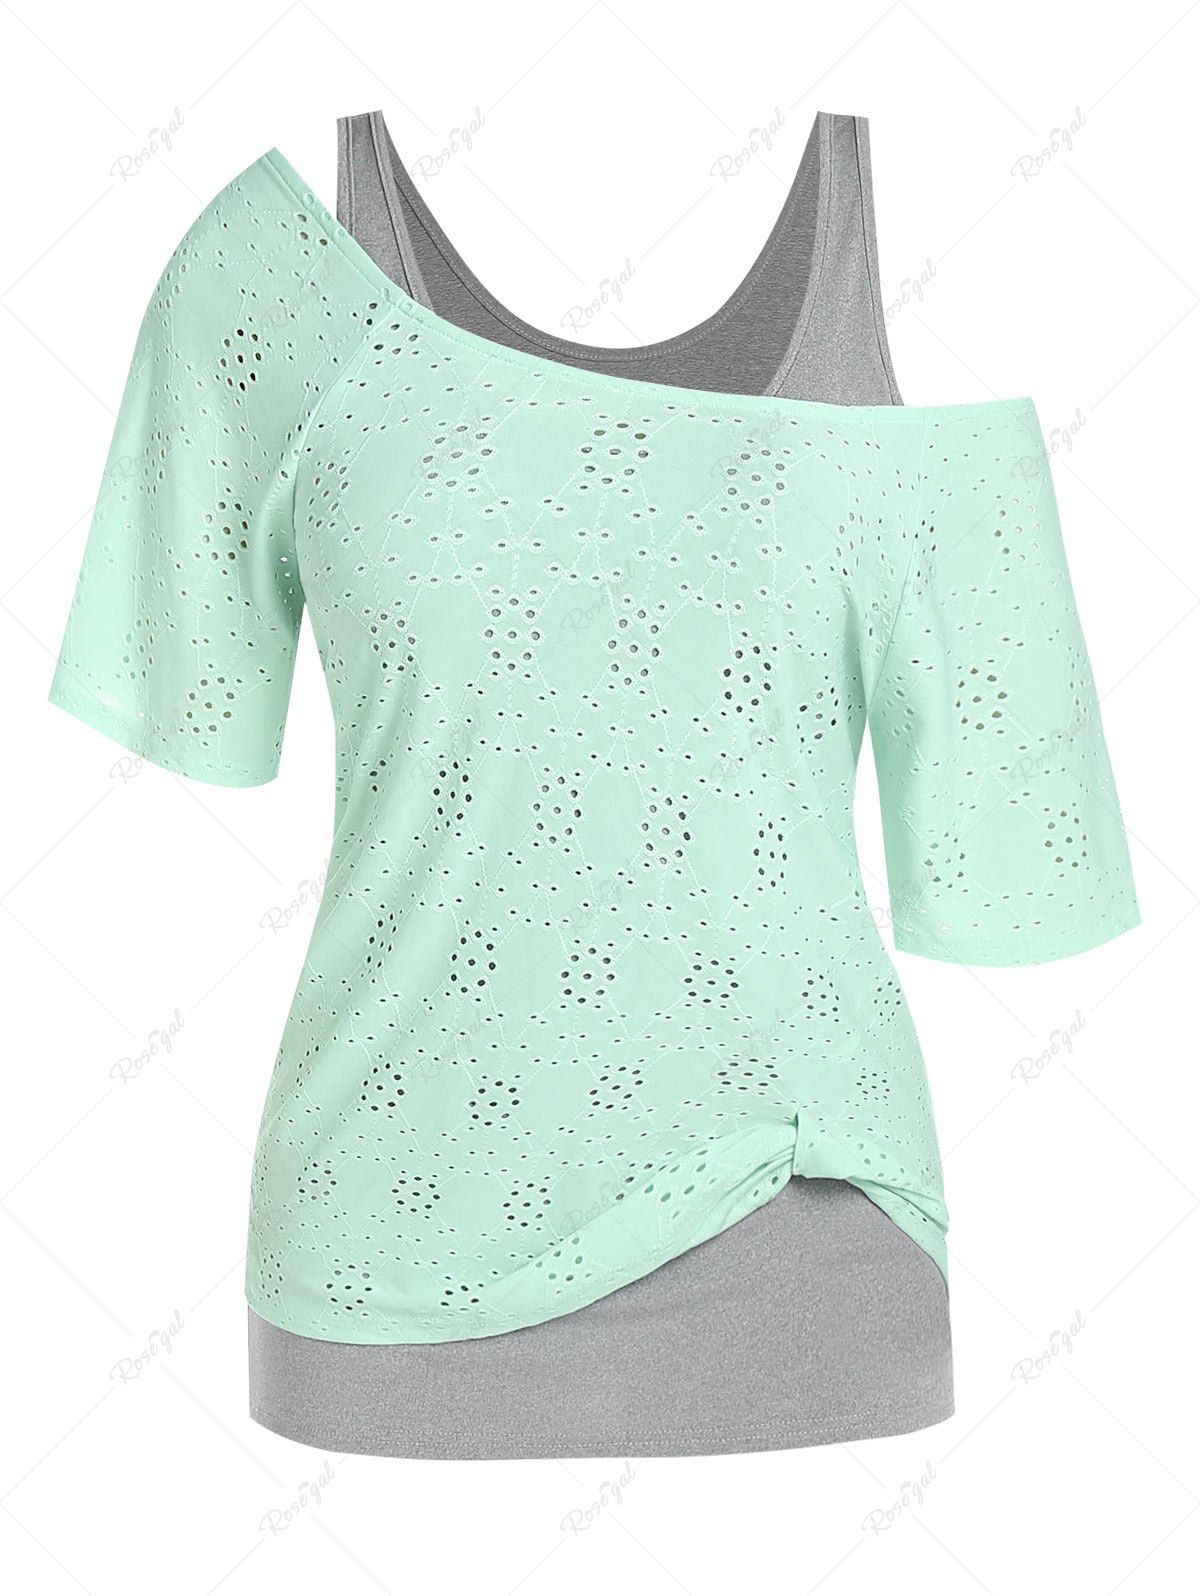 Outfits Plus Size & Curve Skew Collar Eyelet T-shirt and Tank Top Set  